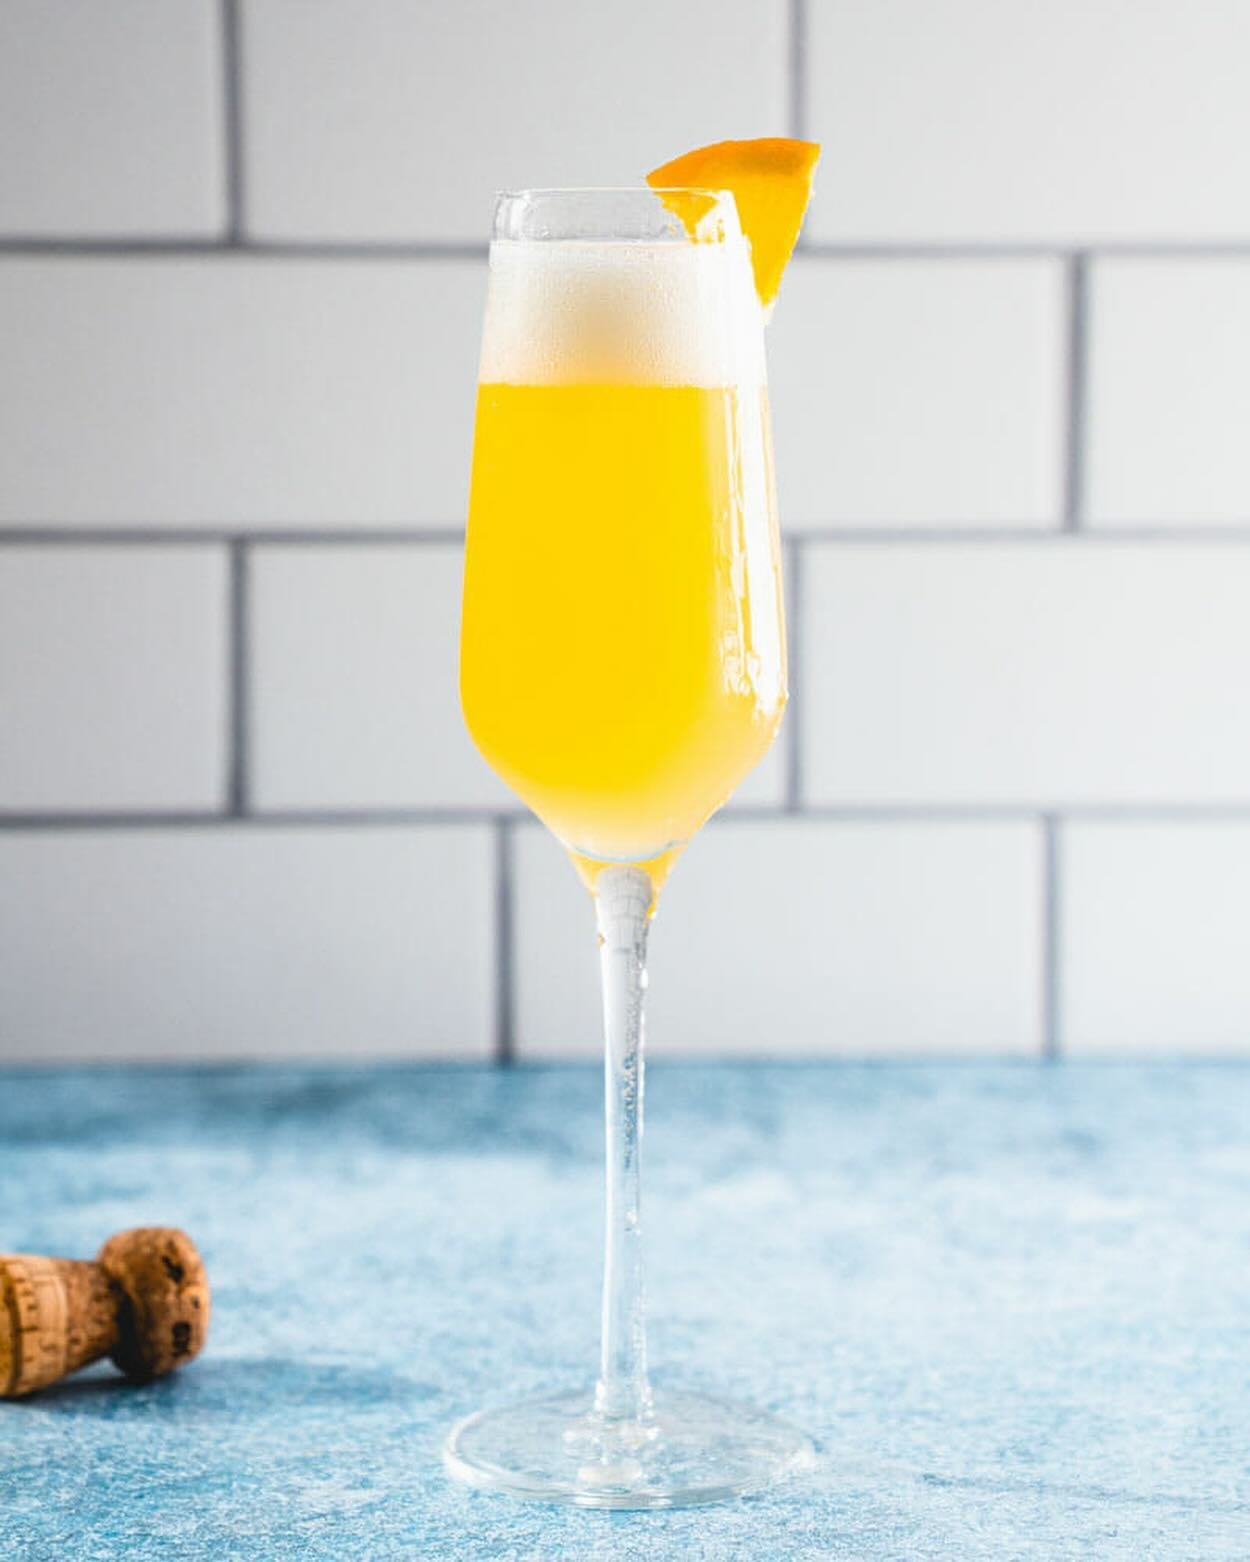 Mom asked and we listened &mdash; Mimosas, Music, Flowers &amp; BBQ 

Italian Cantina del Garda Prosecco Mimosas available today for Mother&rsquo;s Day. FREE pictures by @taysflowerwalls in the front taproom from 1-4. Live music in the ballroom with 